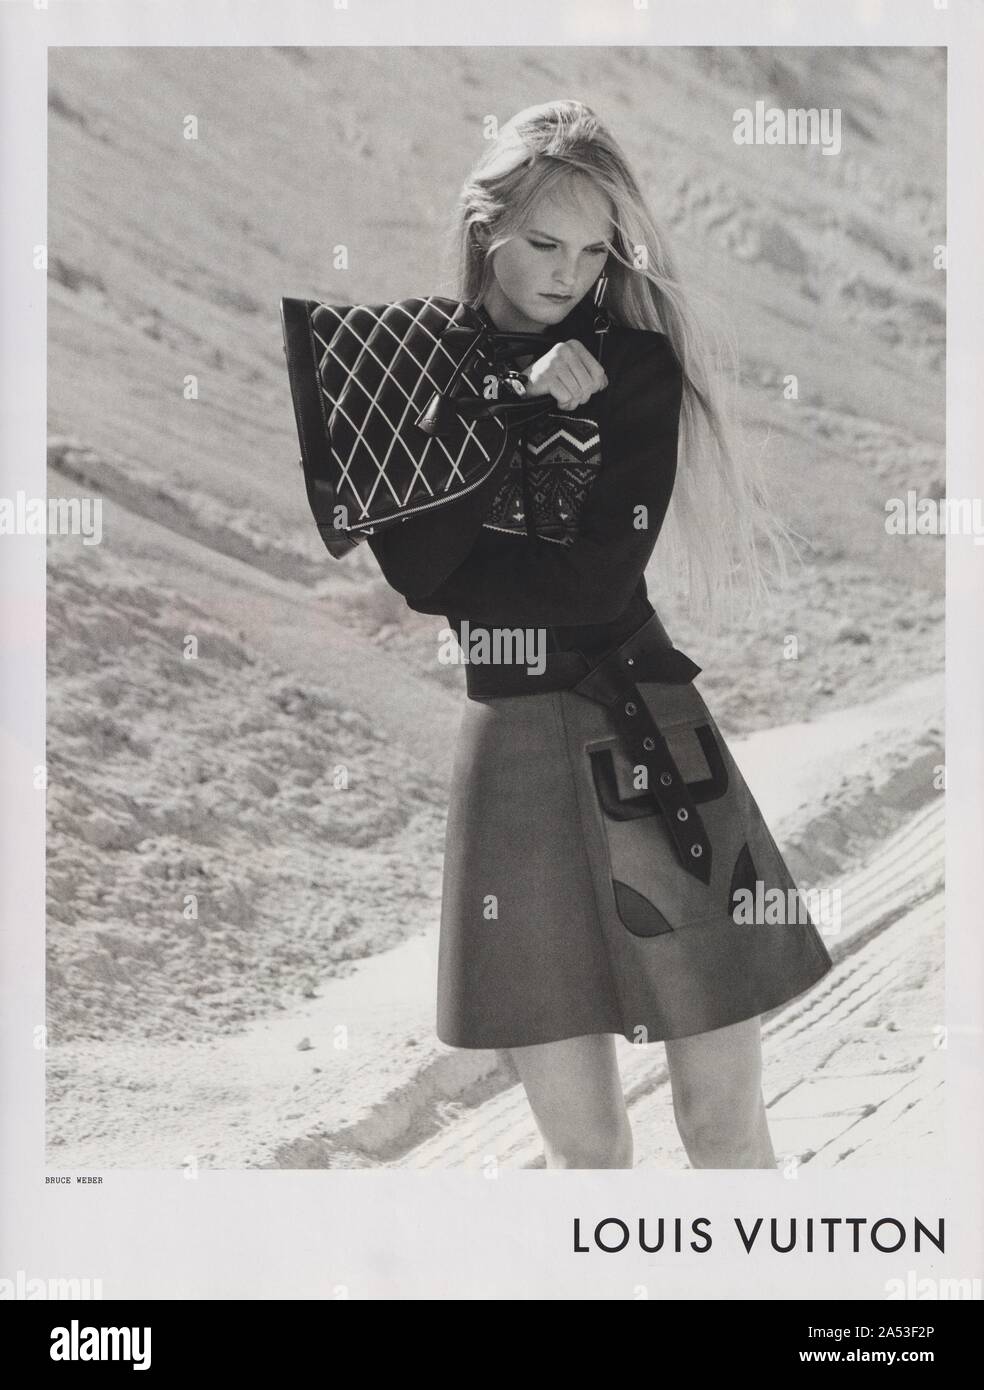 poster advertising Louis Vuitton handbag in paper magazine from 2014 year,  advertisement, creative LV Louis Vuitton advert from 2010s Stock Photo -  Alamy